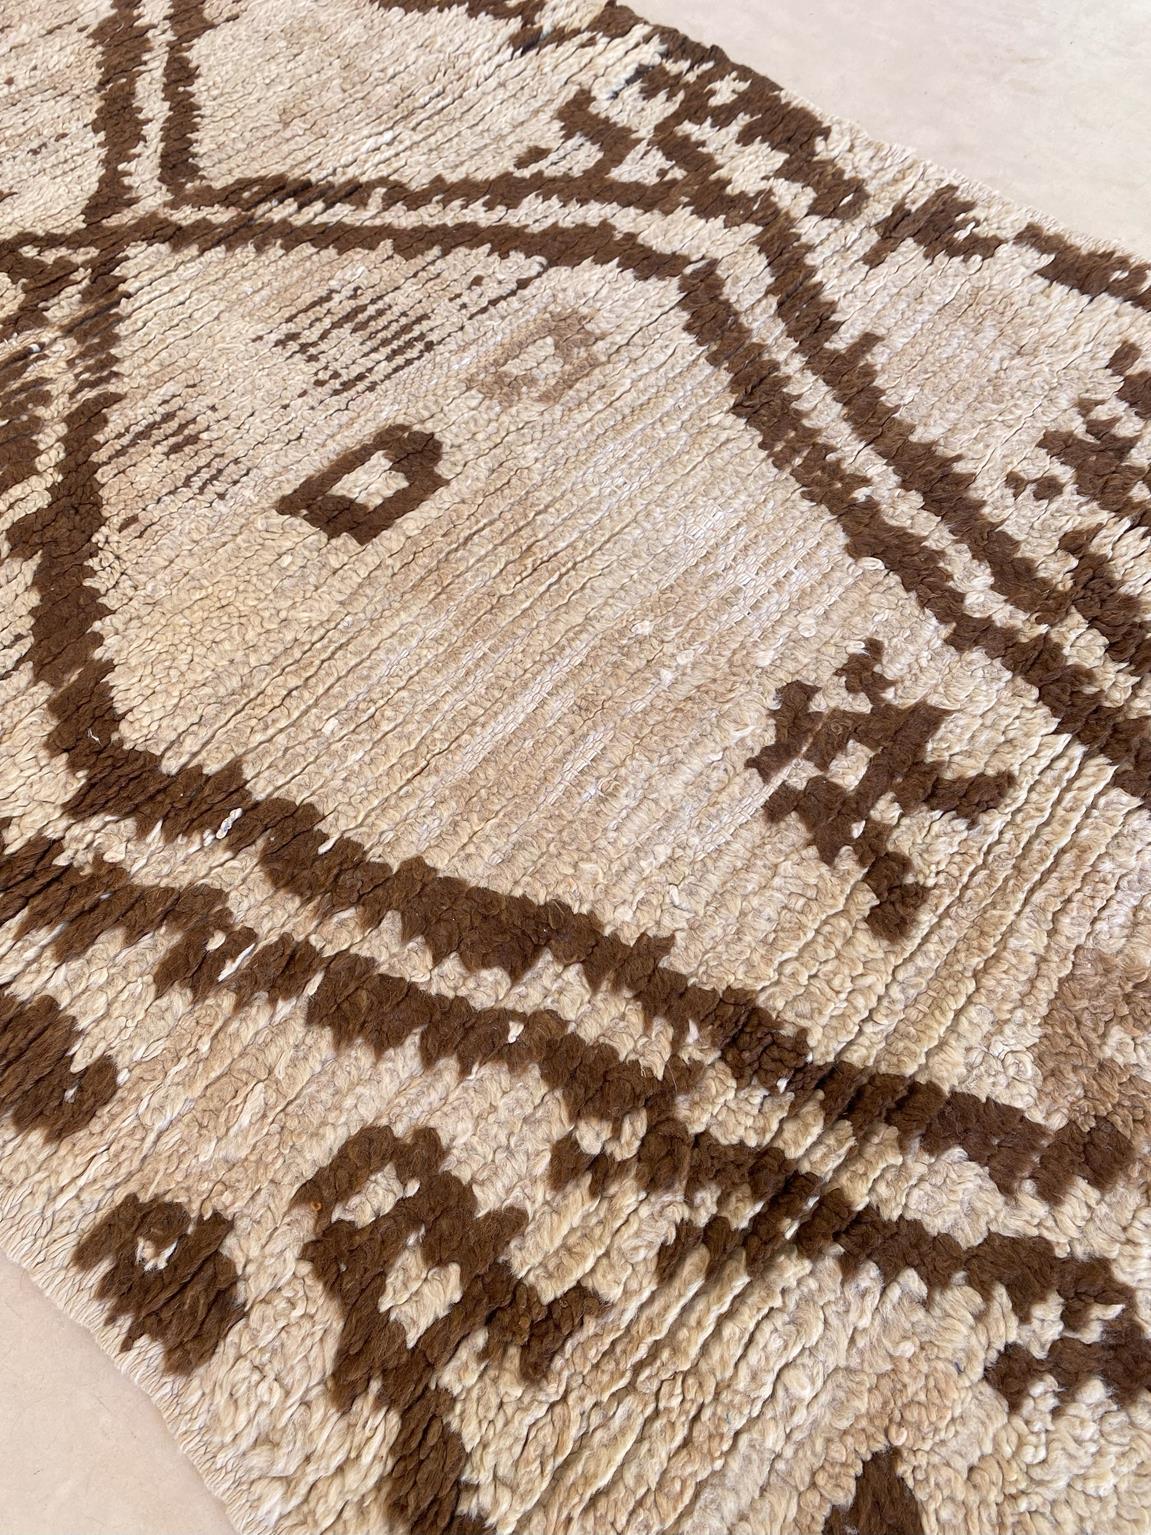 Vintage Moroccan Azilal rug - Beige/brown - 2.9x6.2feet / 88x188cm For Sale 2